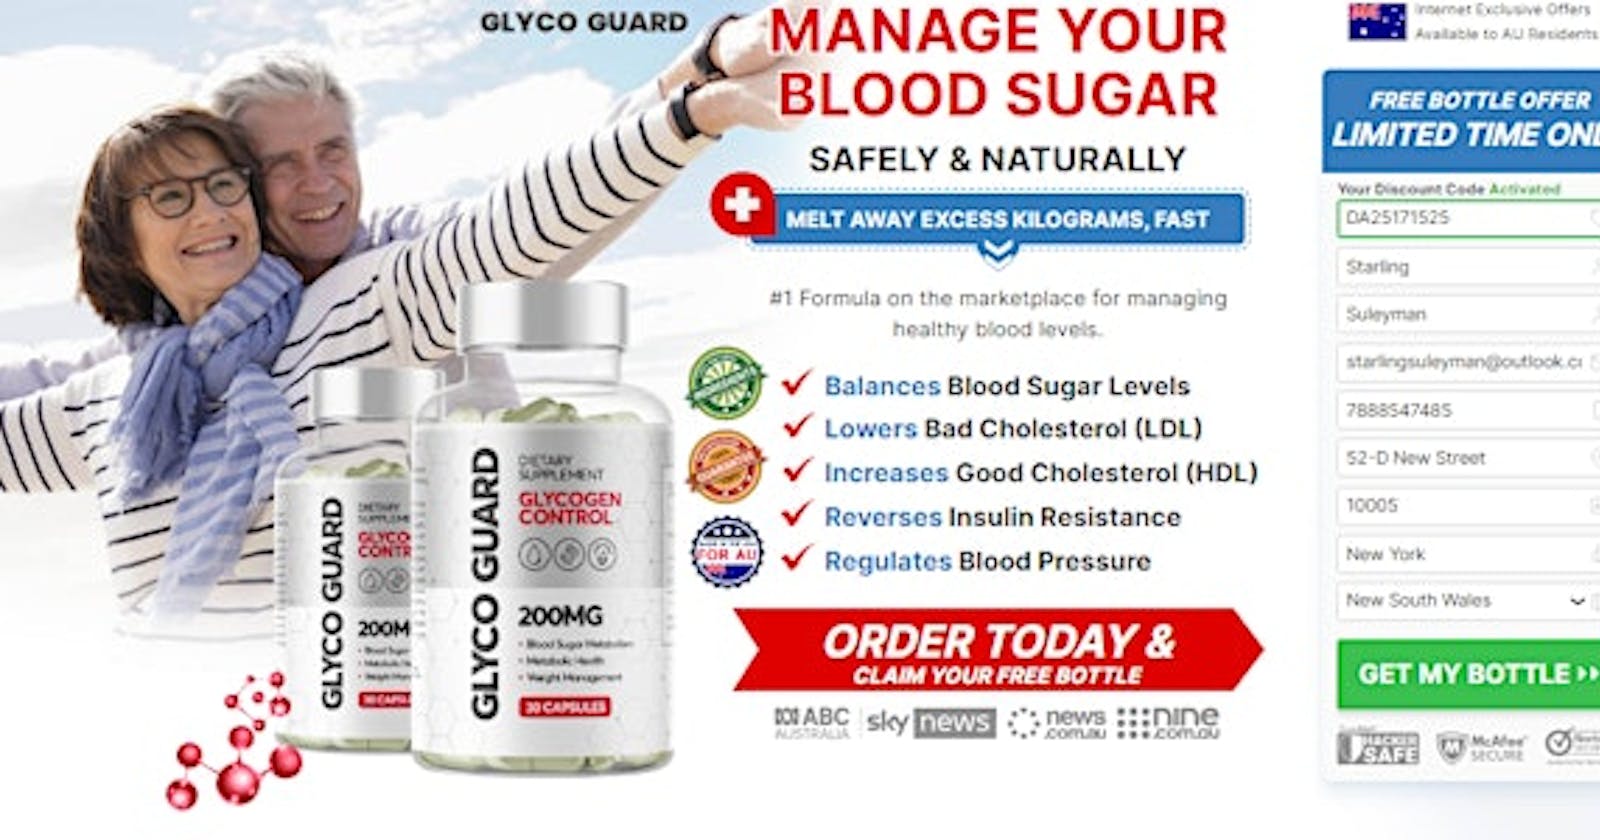 Glycogen Control AU [Fake or Trusted] How Does It Work?